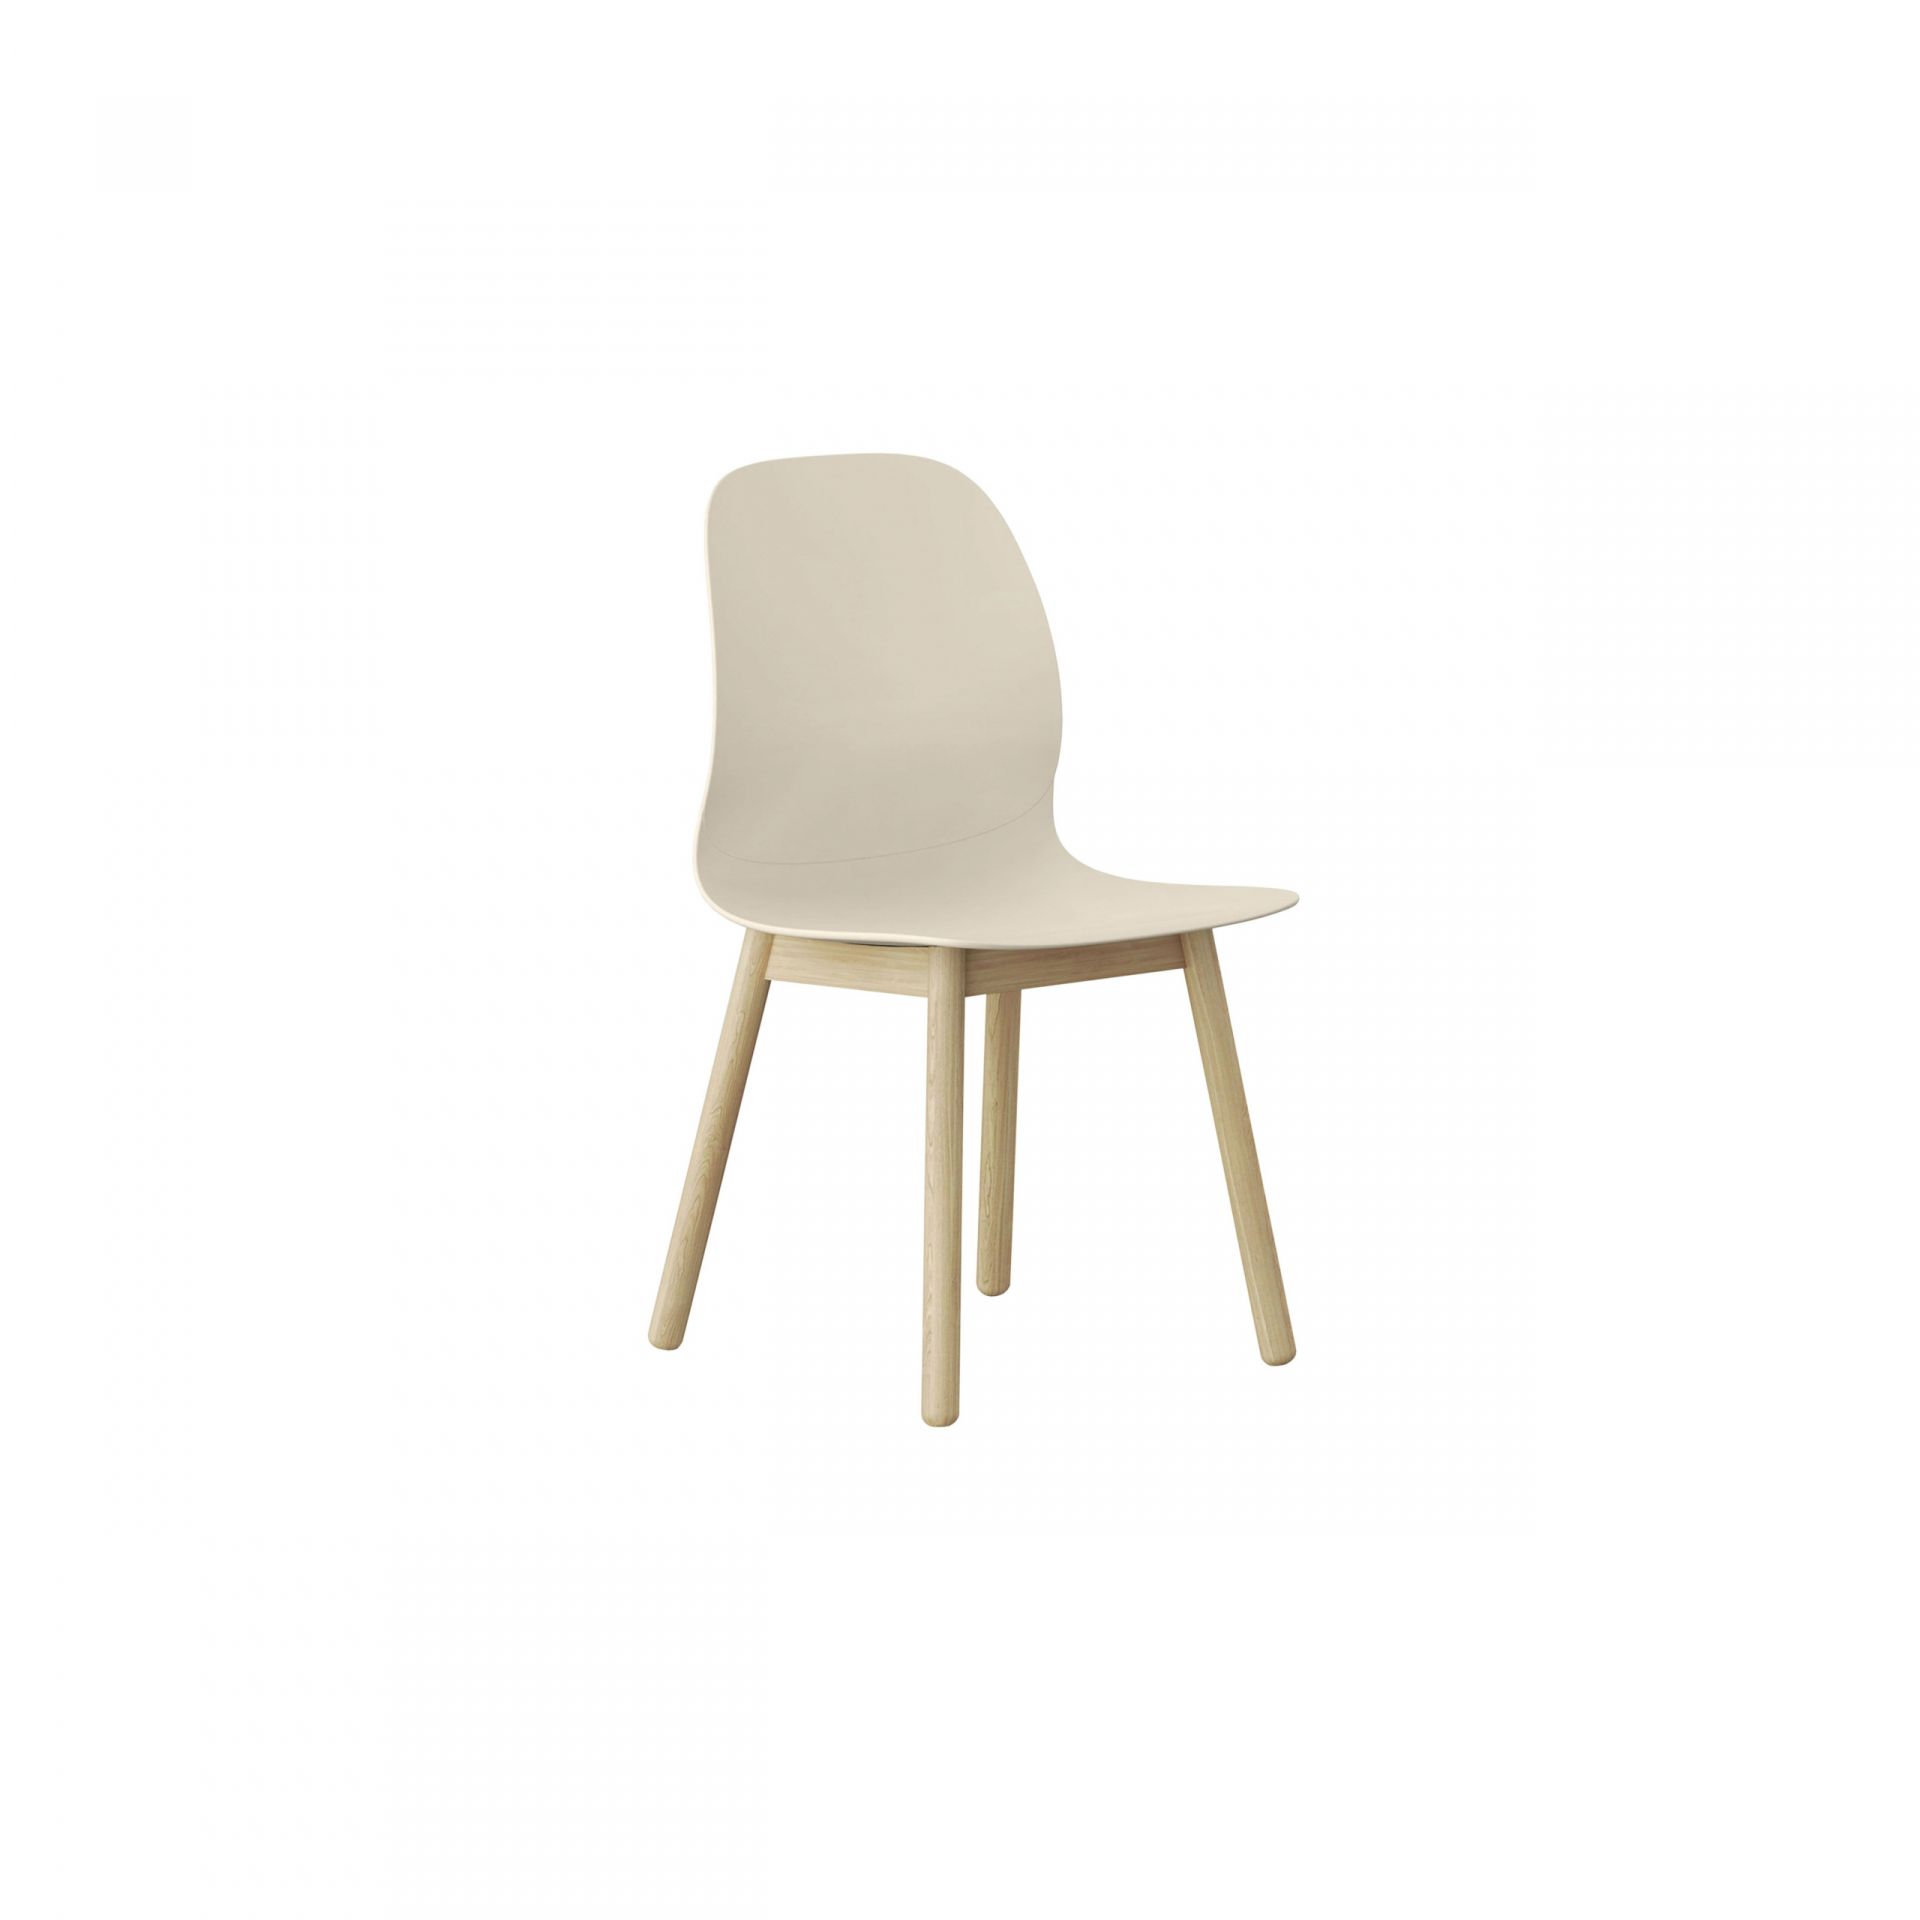 Archie Chair with wooden legs product image 1